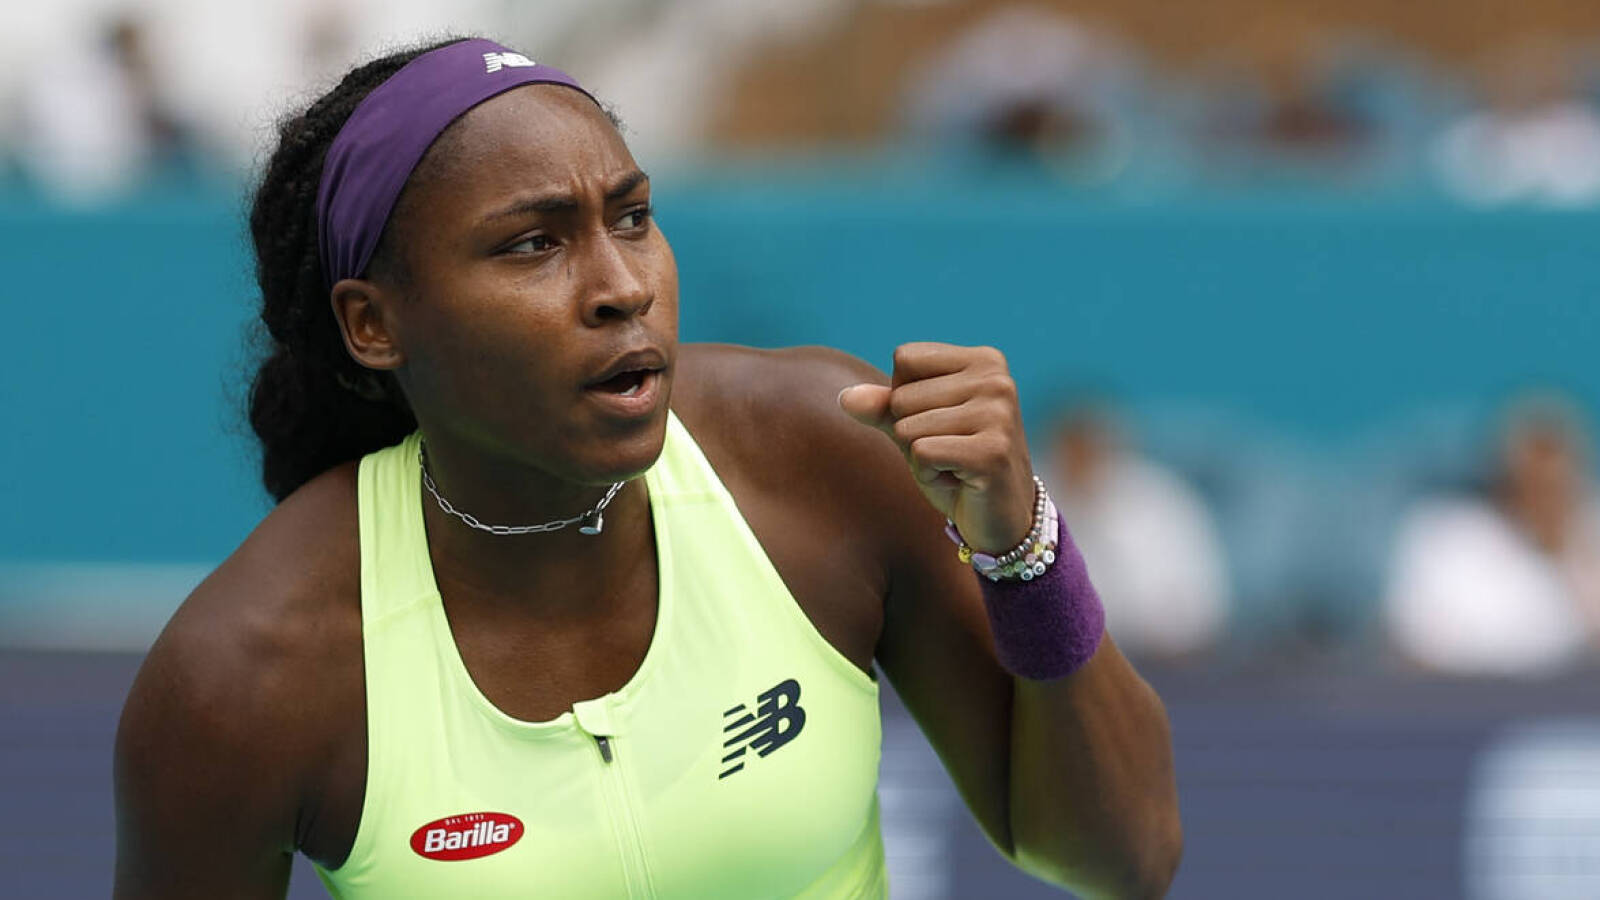 'She is a tough opponent to play,' Coco Gauff ready for the Iga Swiatek’s challenge in Rome Semifinals as she takes down Qinwen Zheng in straight sets